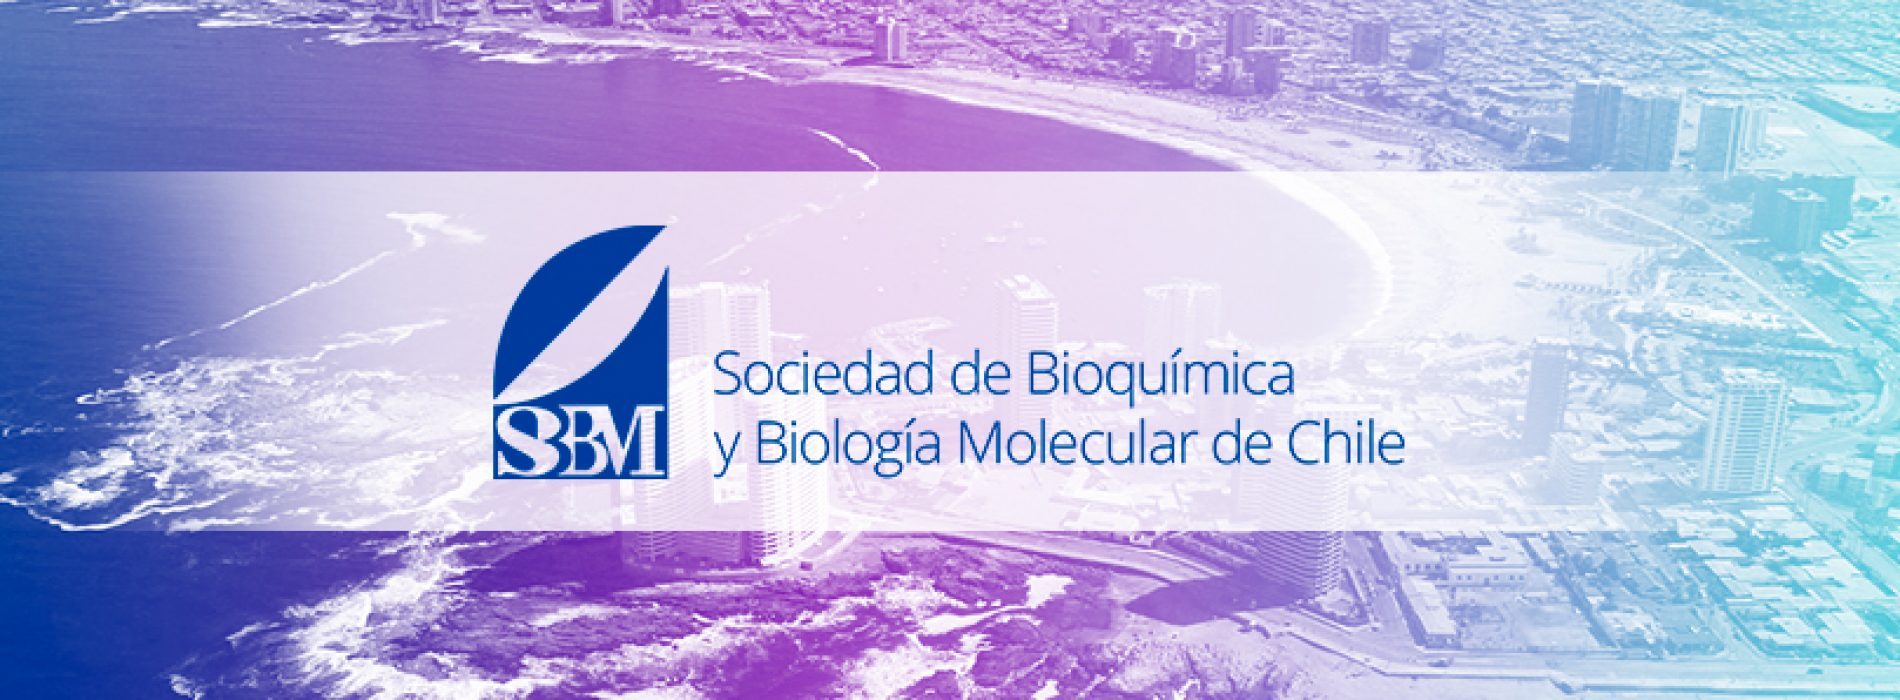 July 15 close delayed receipt of summaries for Congress of the society of Biochemistry and Molecular Biology of Chile